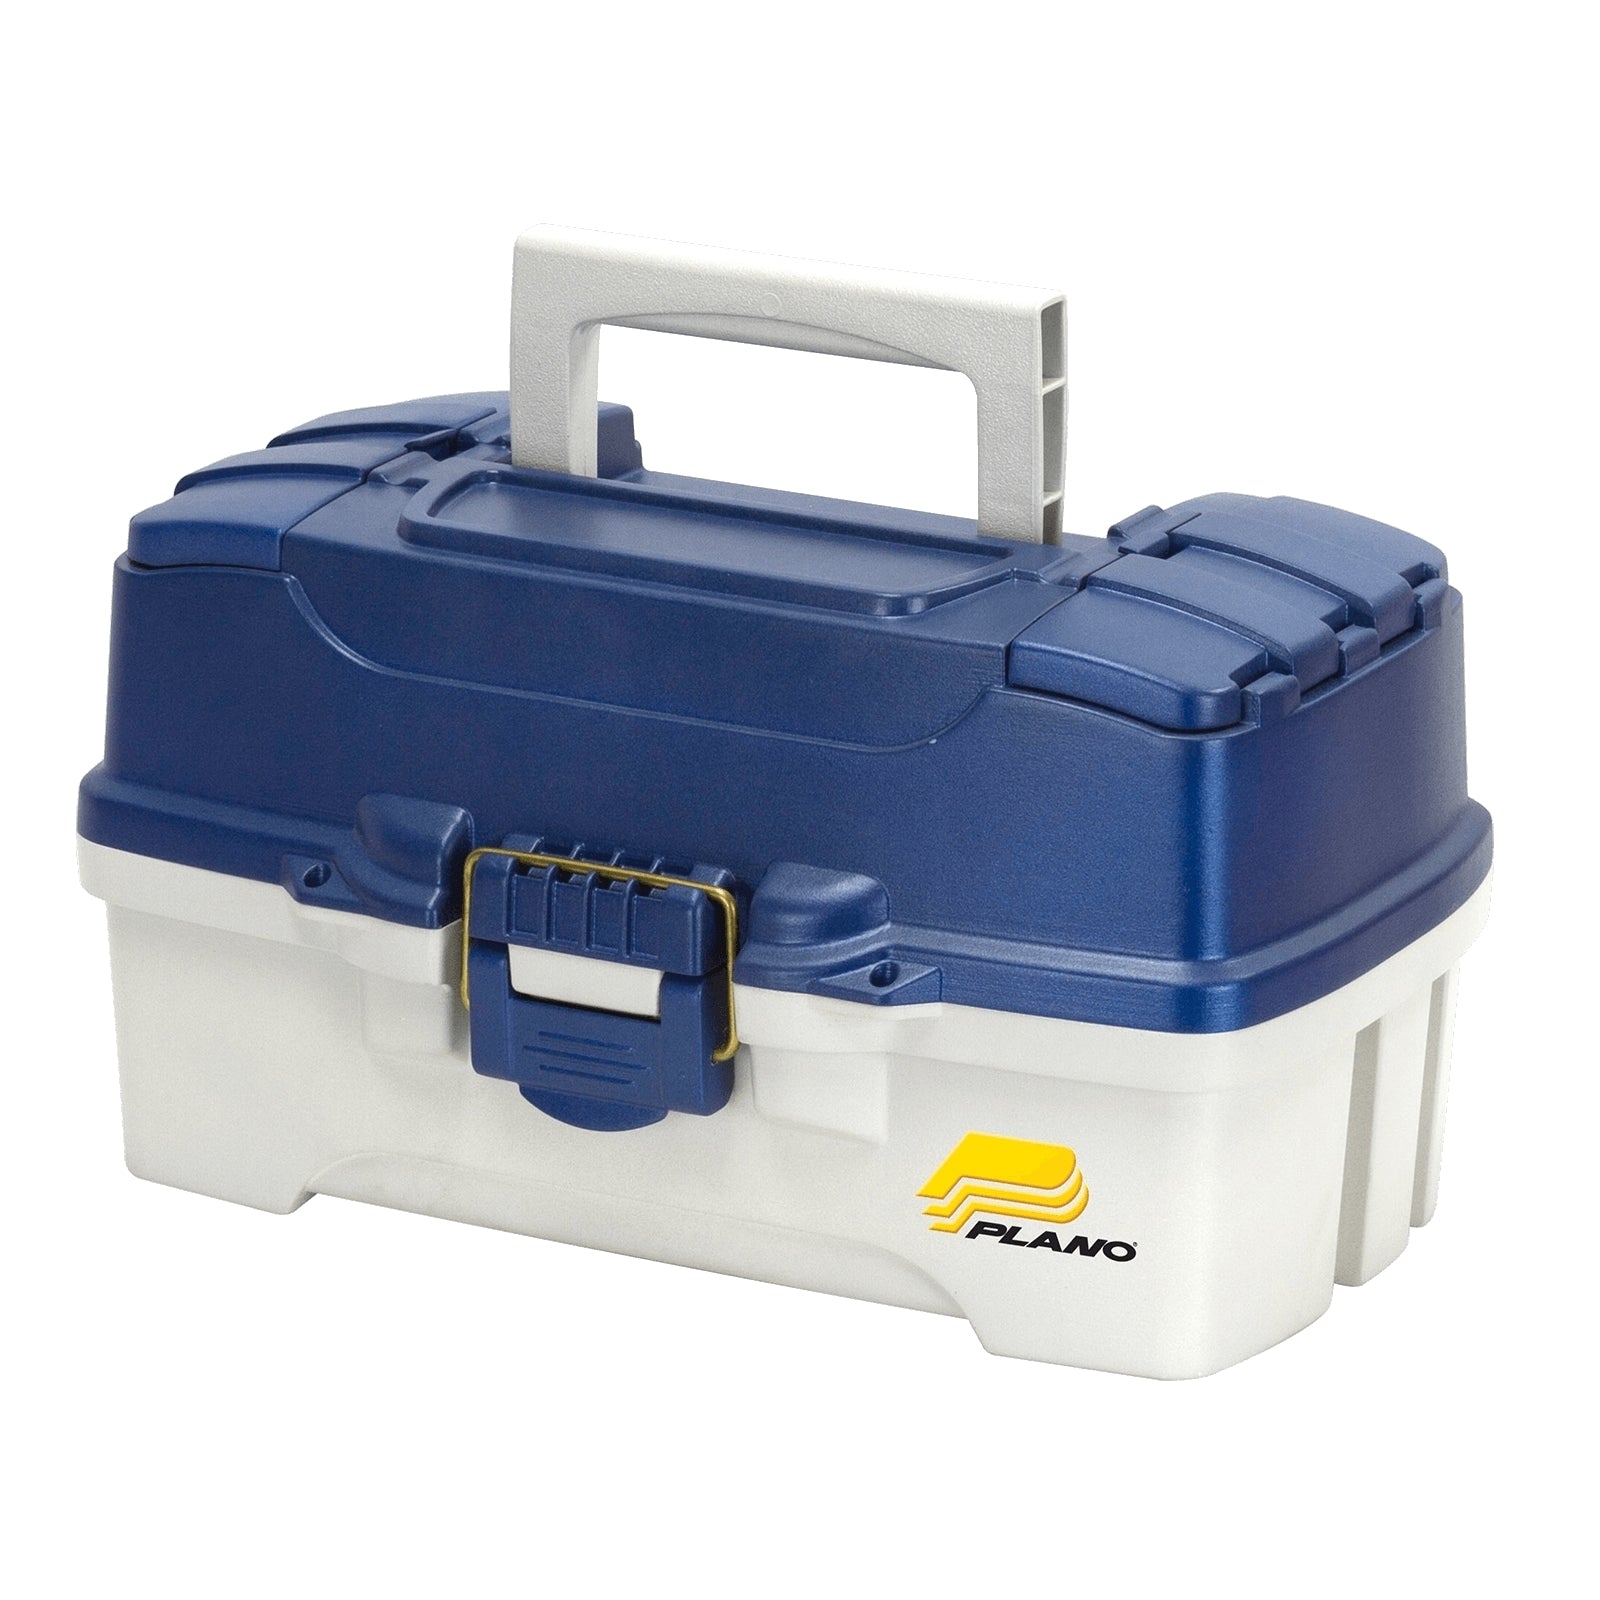 Plano 2-Tray Tackle Box with Dual Top Access Blue Metallic/Off White